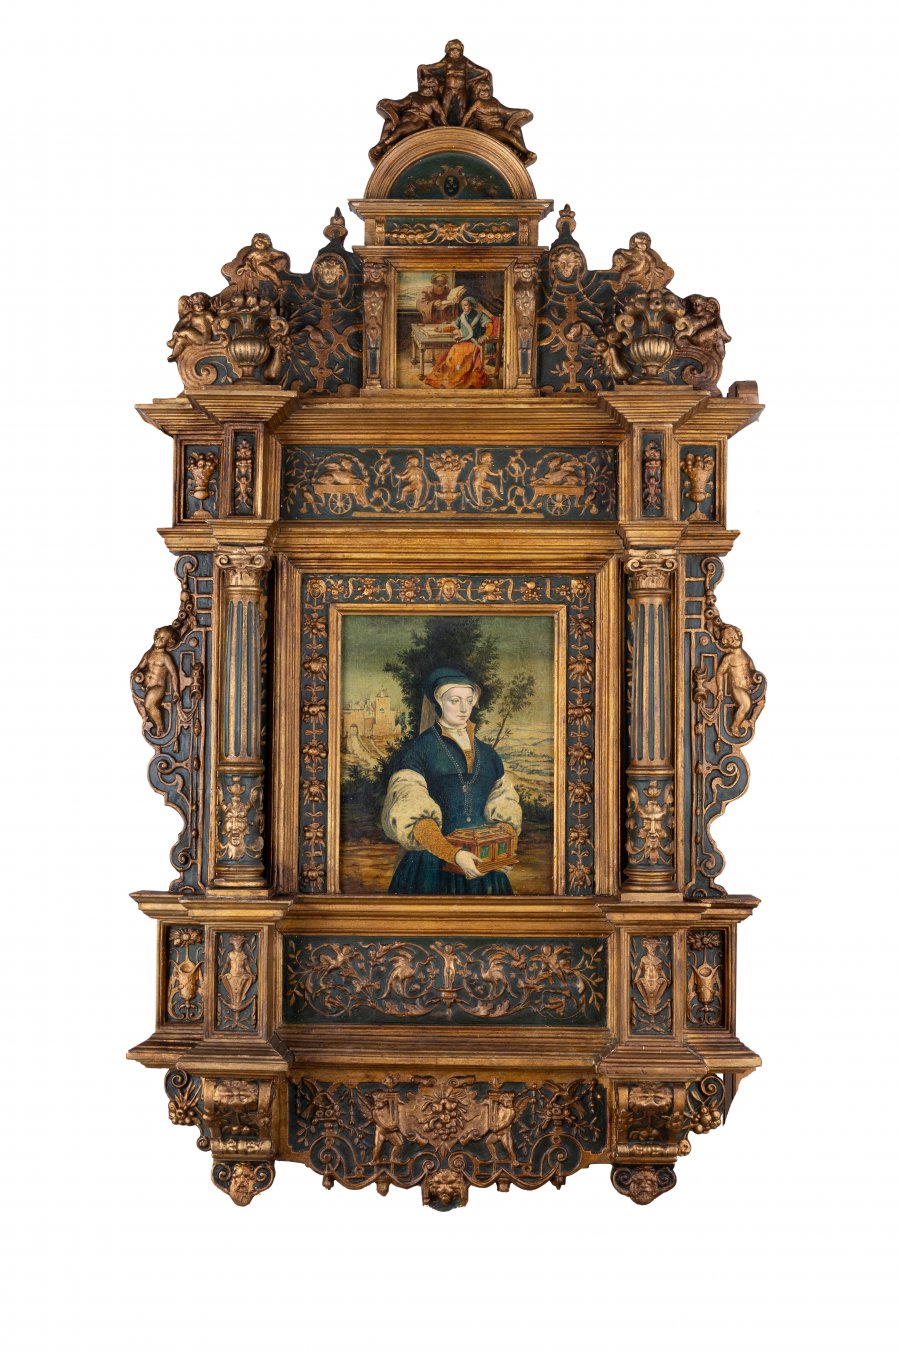 PORTRAIT OF A WOMAN WITH JEWELLERY BOX